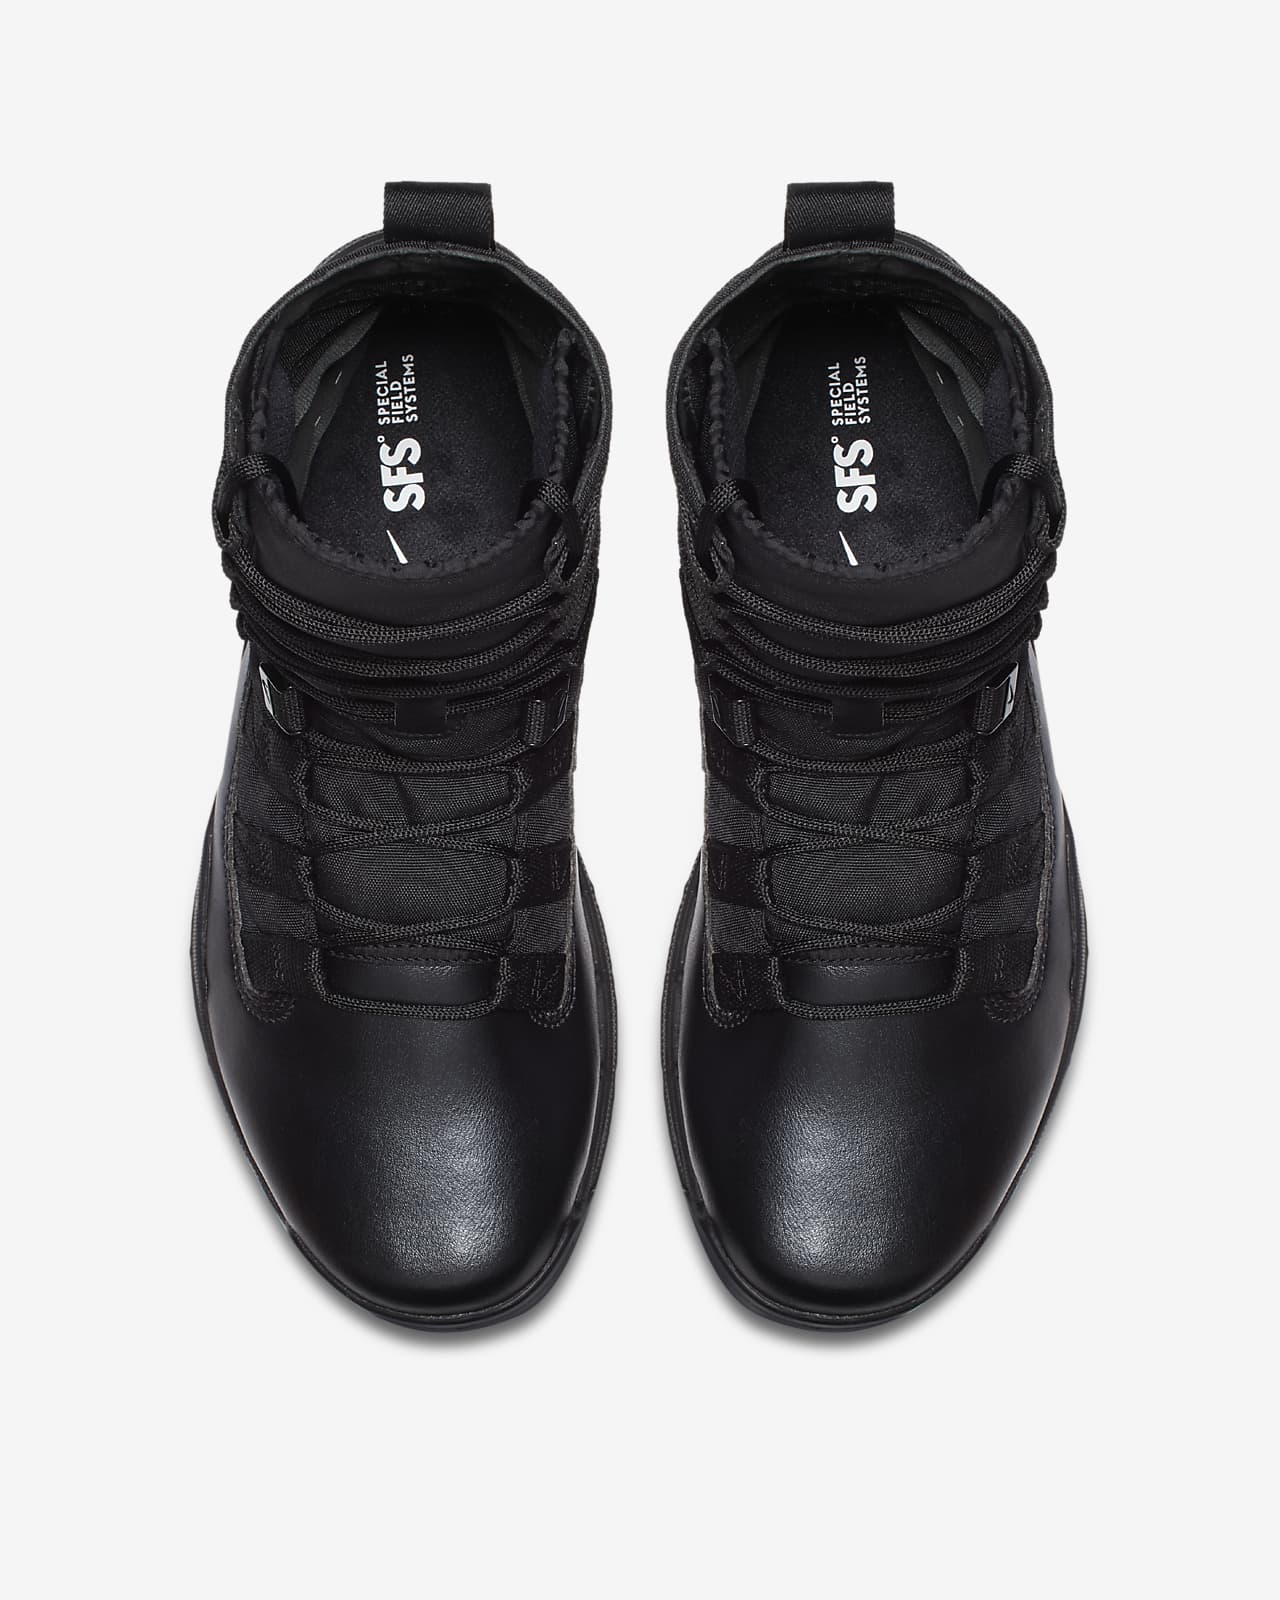 nike air combat boots